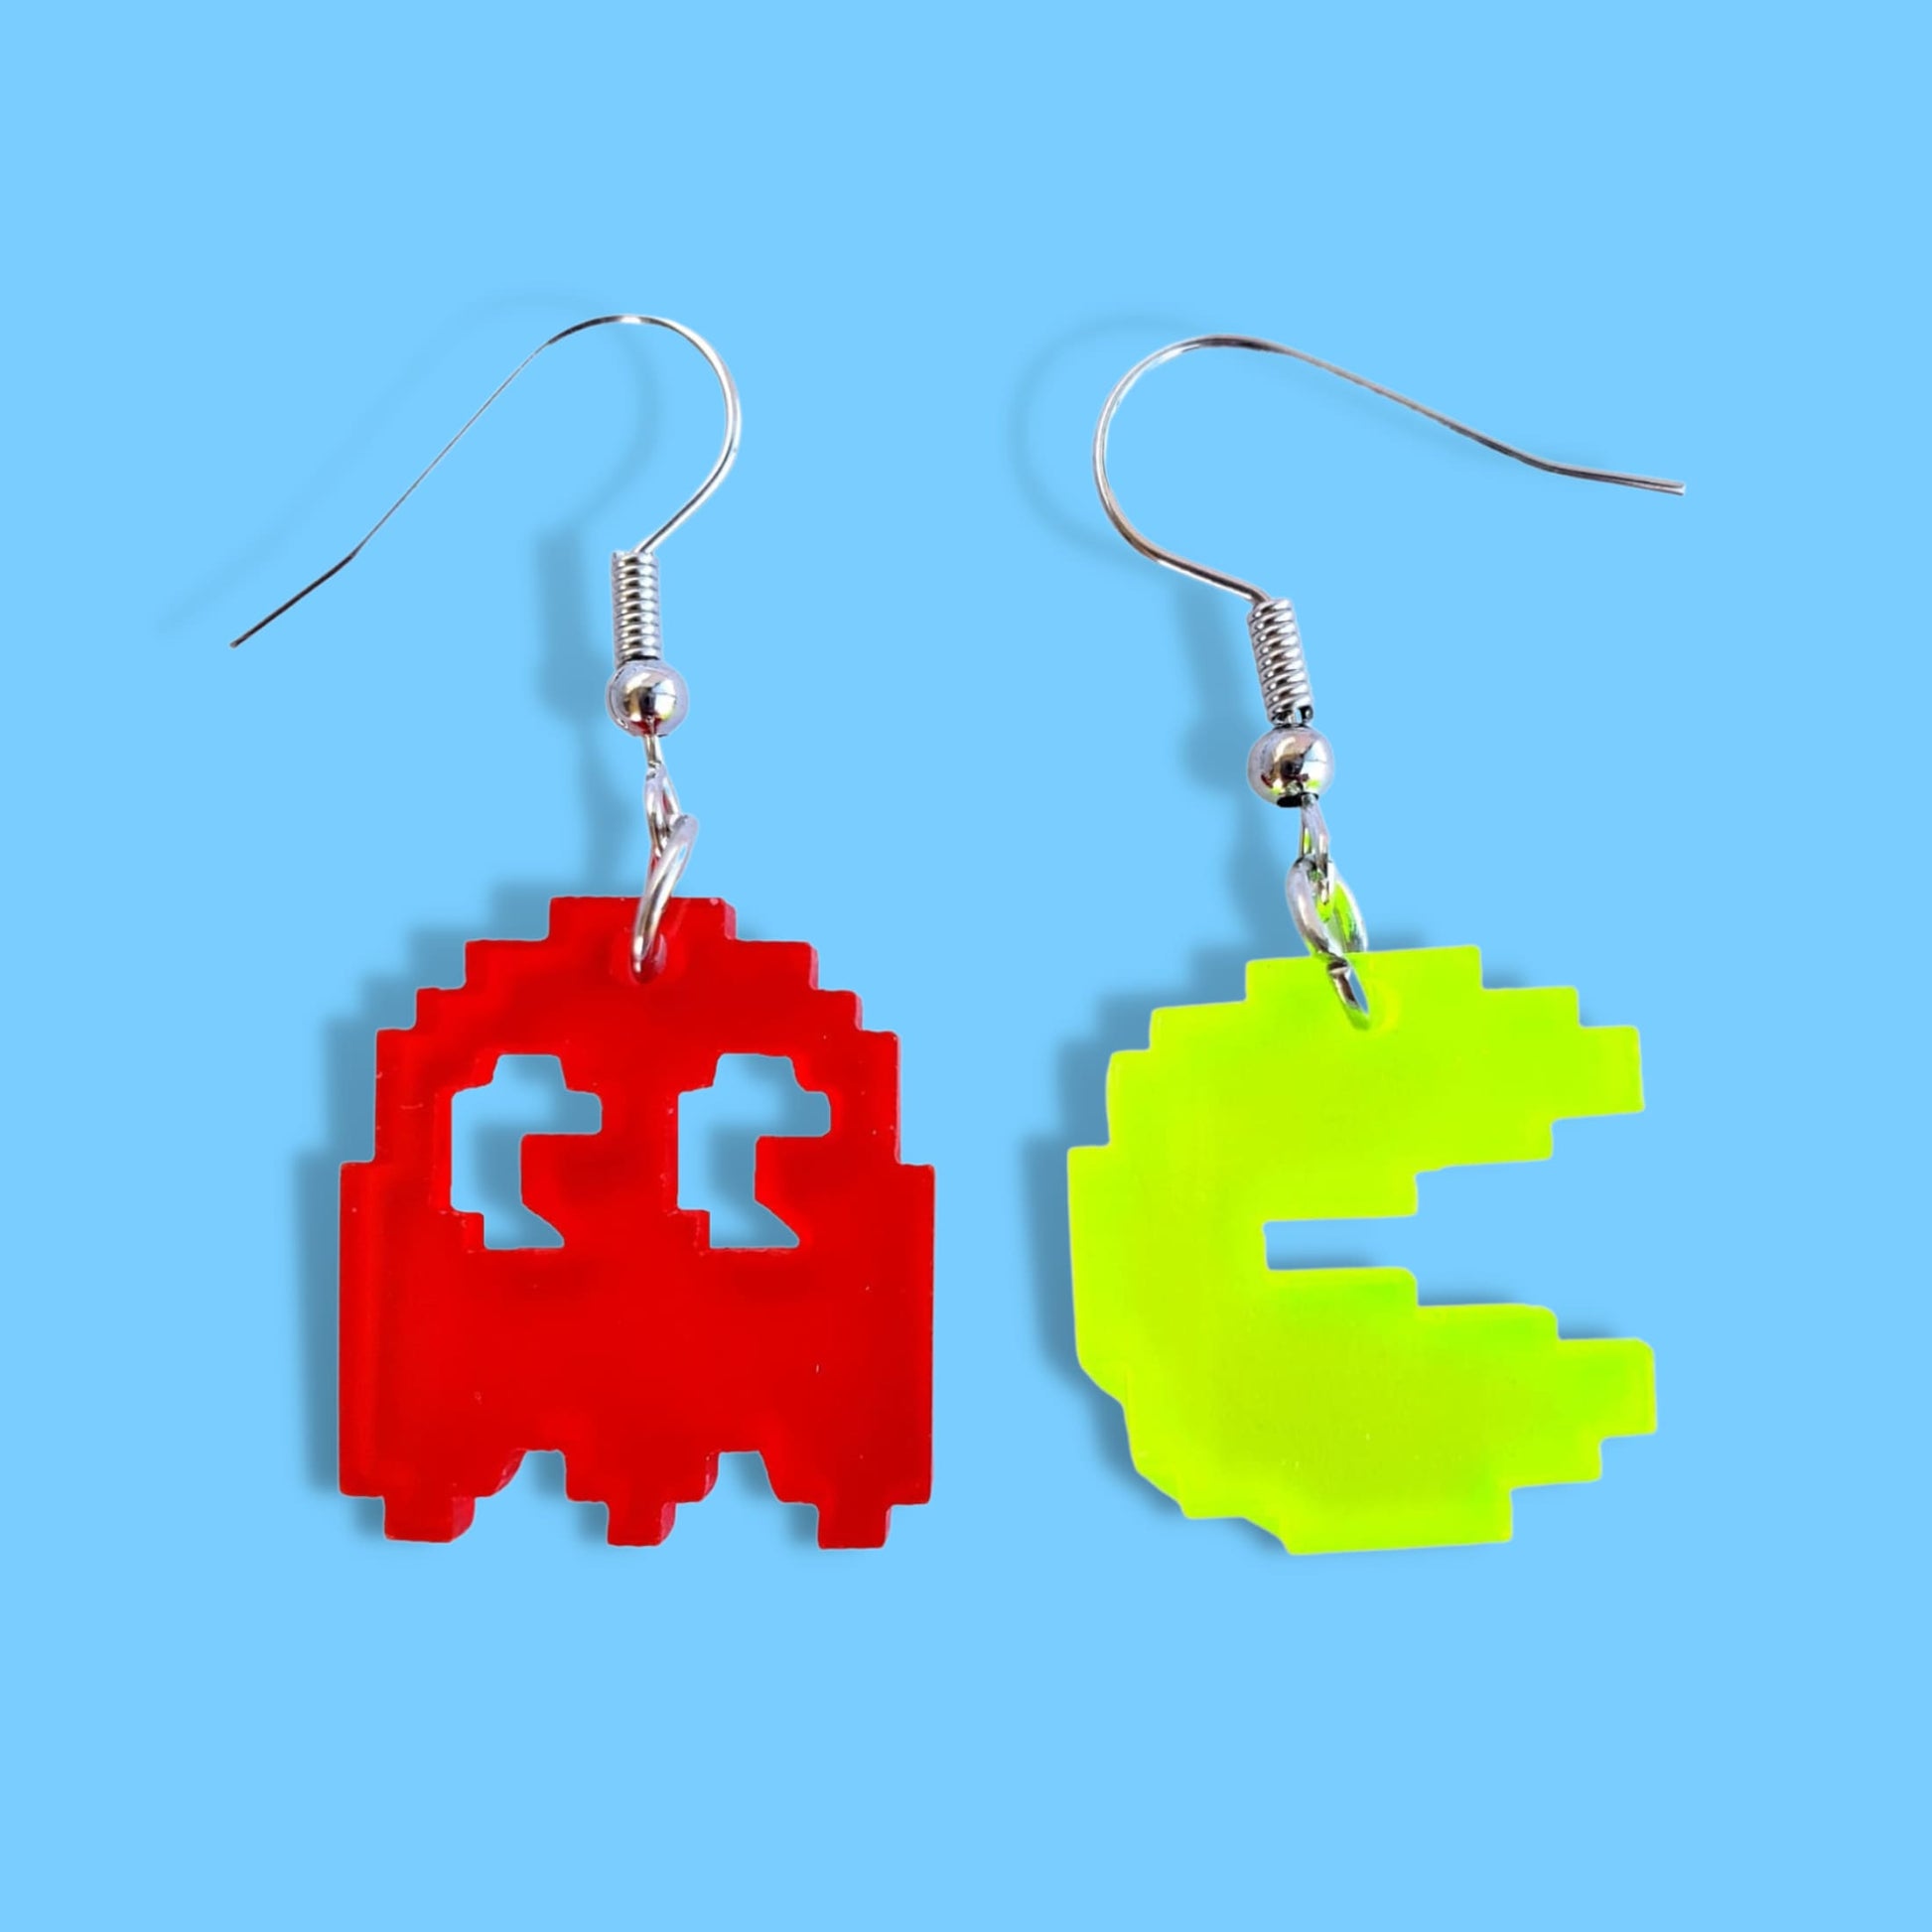 Pac-Man, Blinky, Pinky, Inky, and Clyde Acrylic Earring Set from Confetti Kitty, Only 14.99